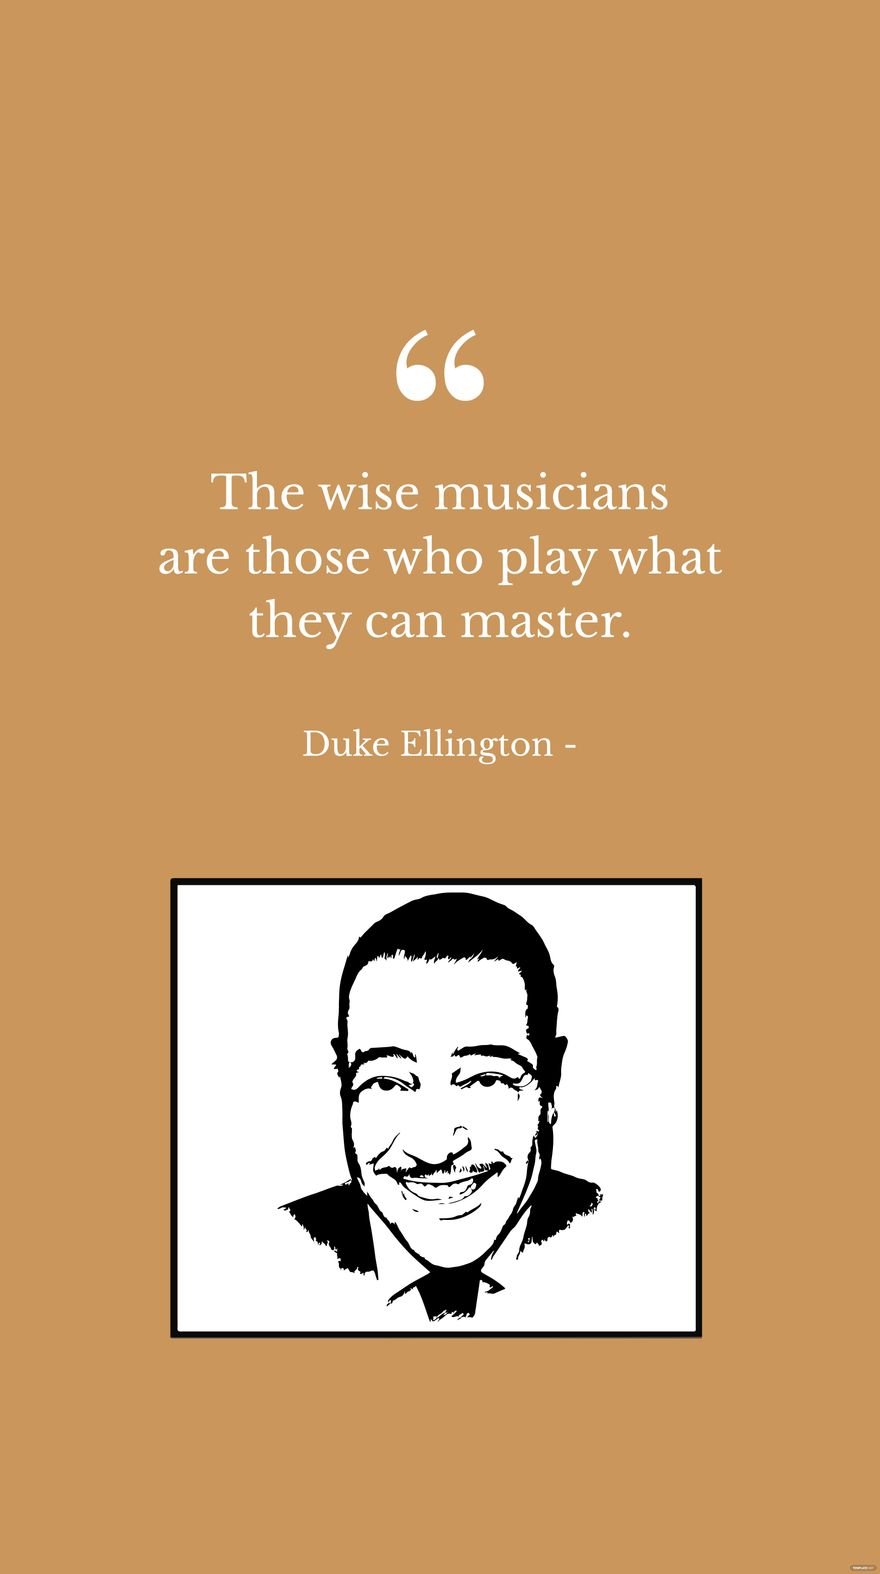 Duke Ellington - The wise musicians are those who play what they can master.